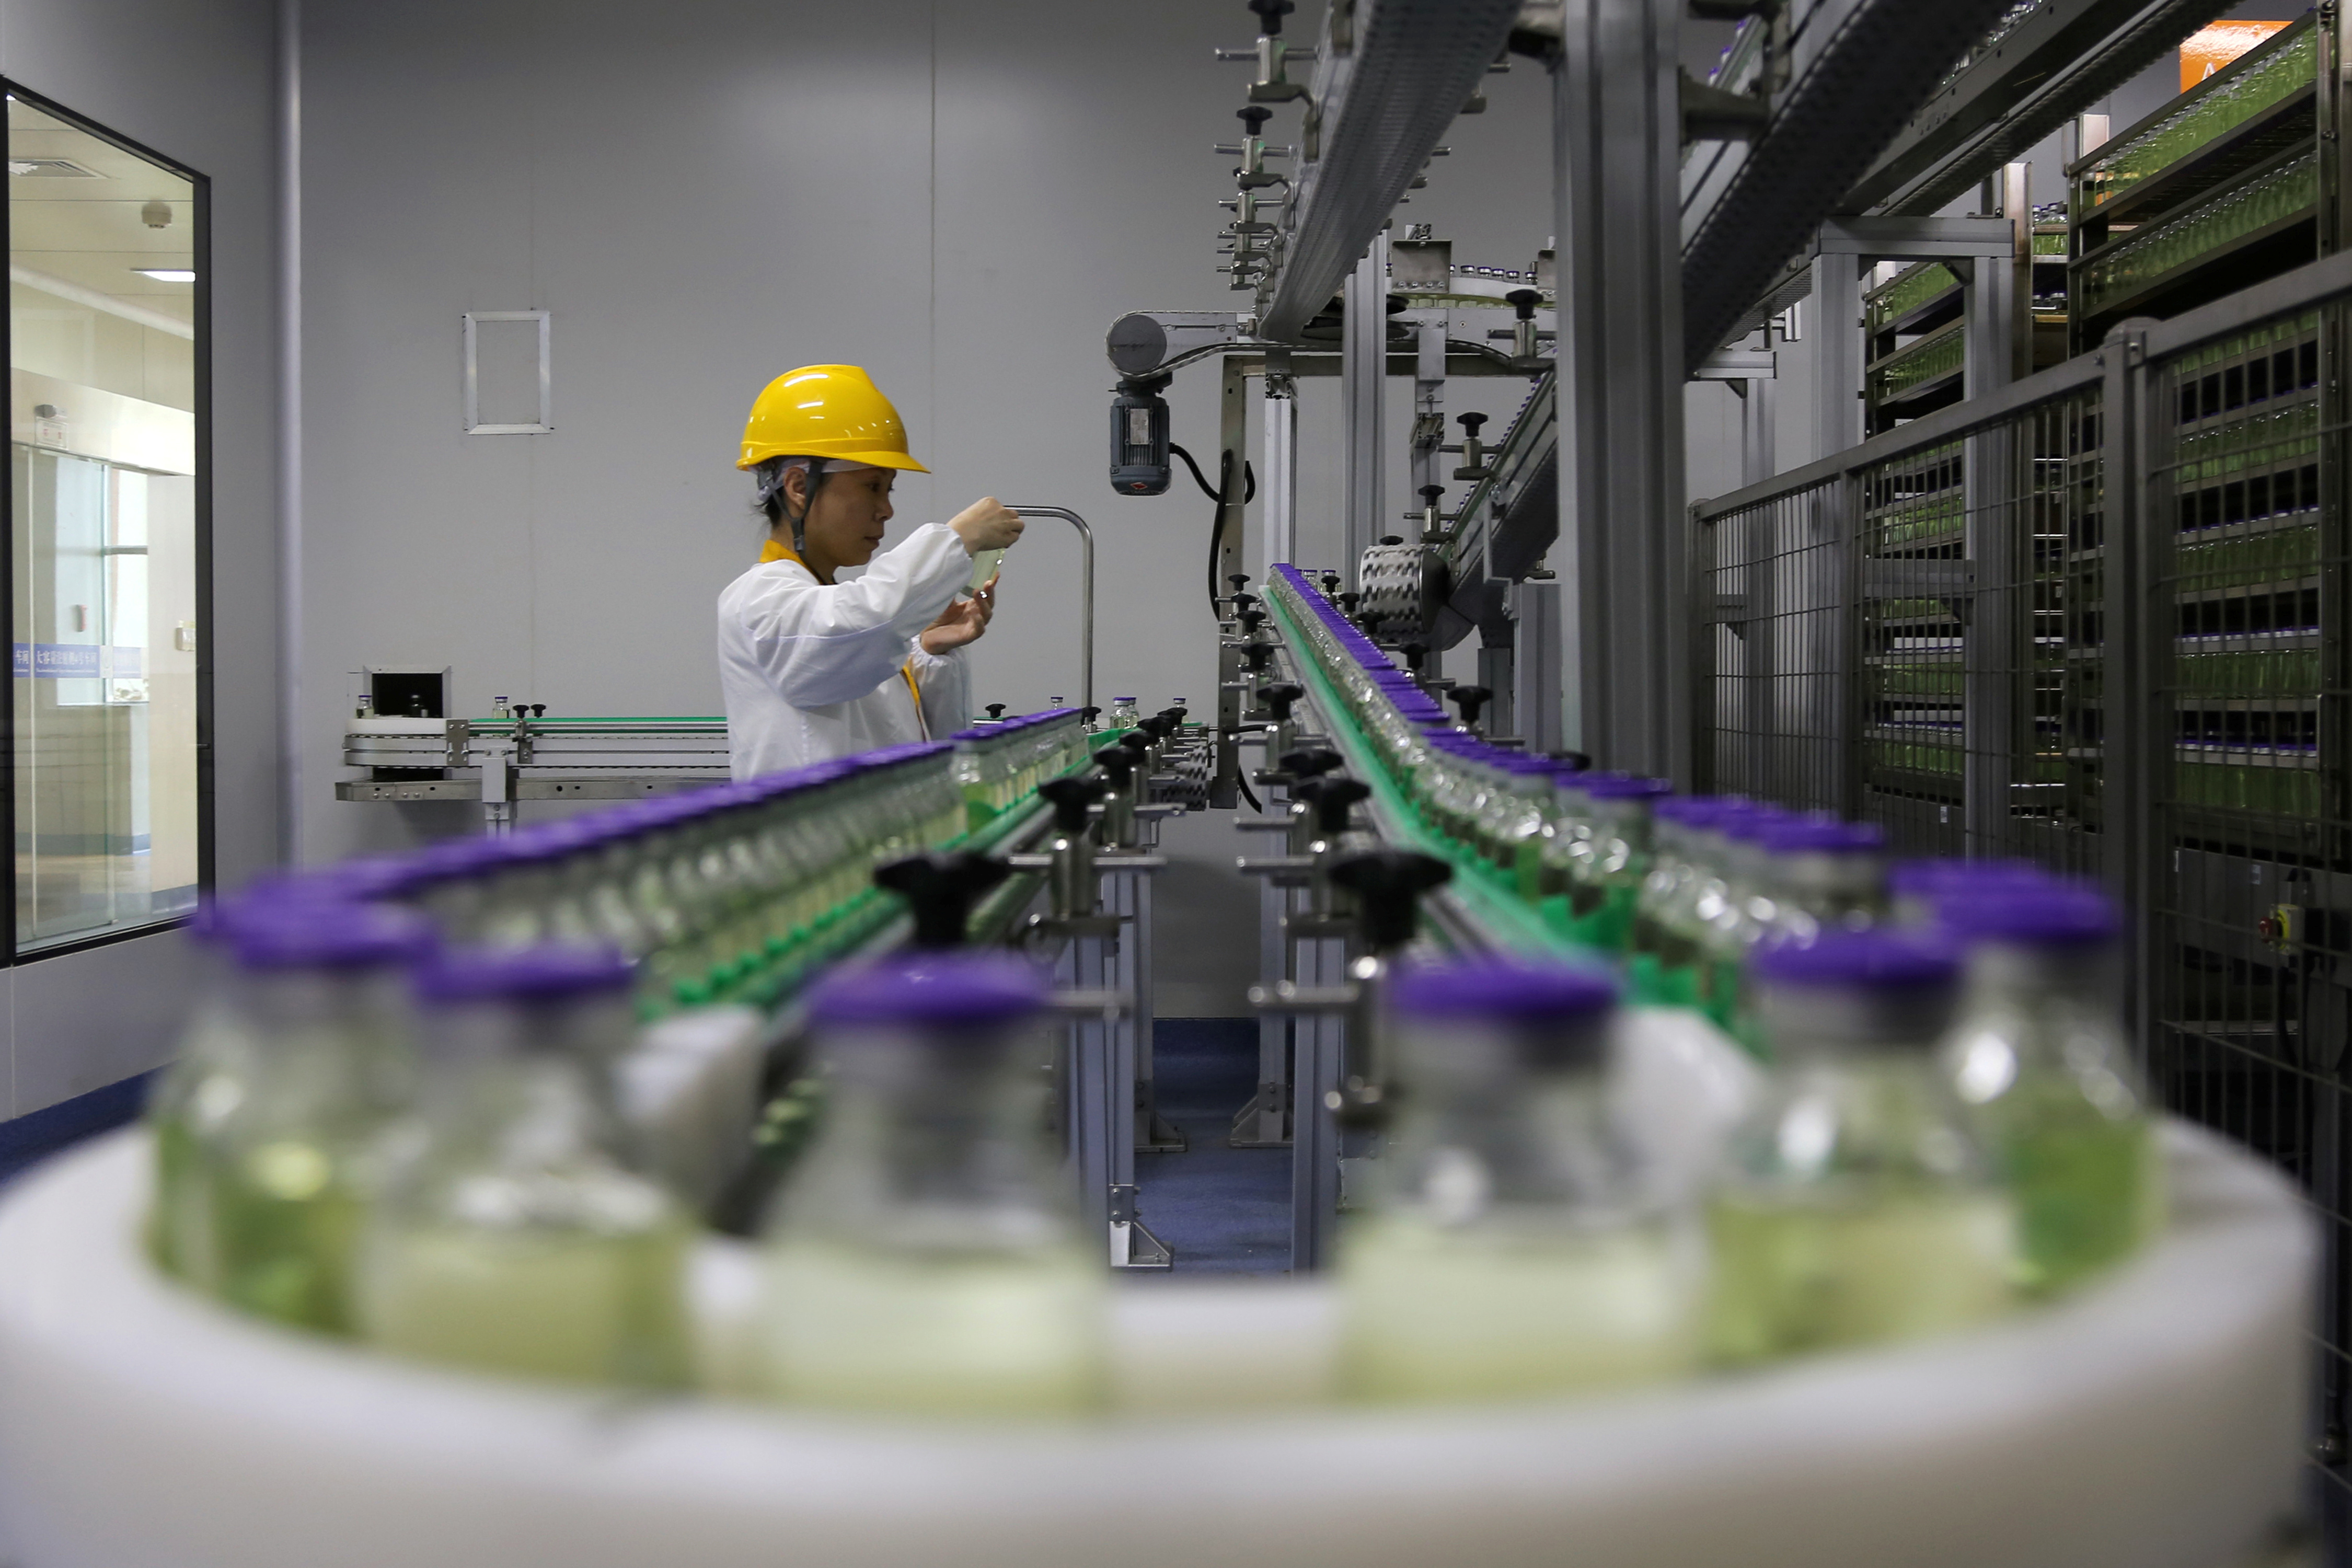 Employee works on a production line manufacturing drugs at the Yangtze River Pharmaceutical Group in Taizhou, Jiangsu